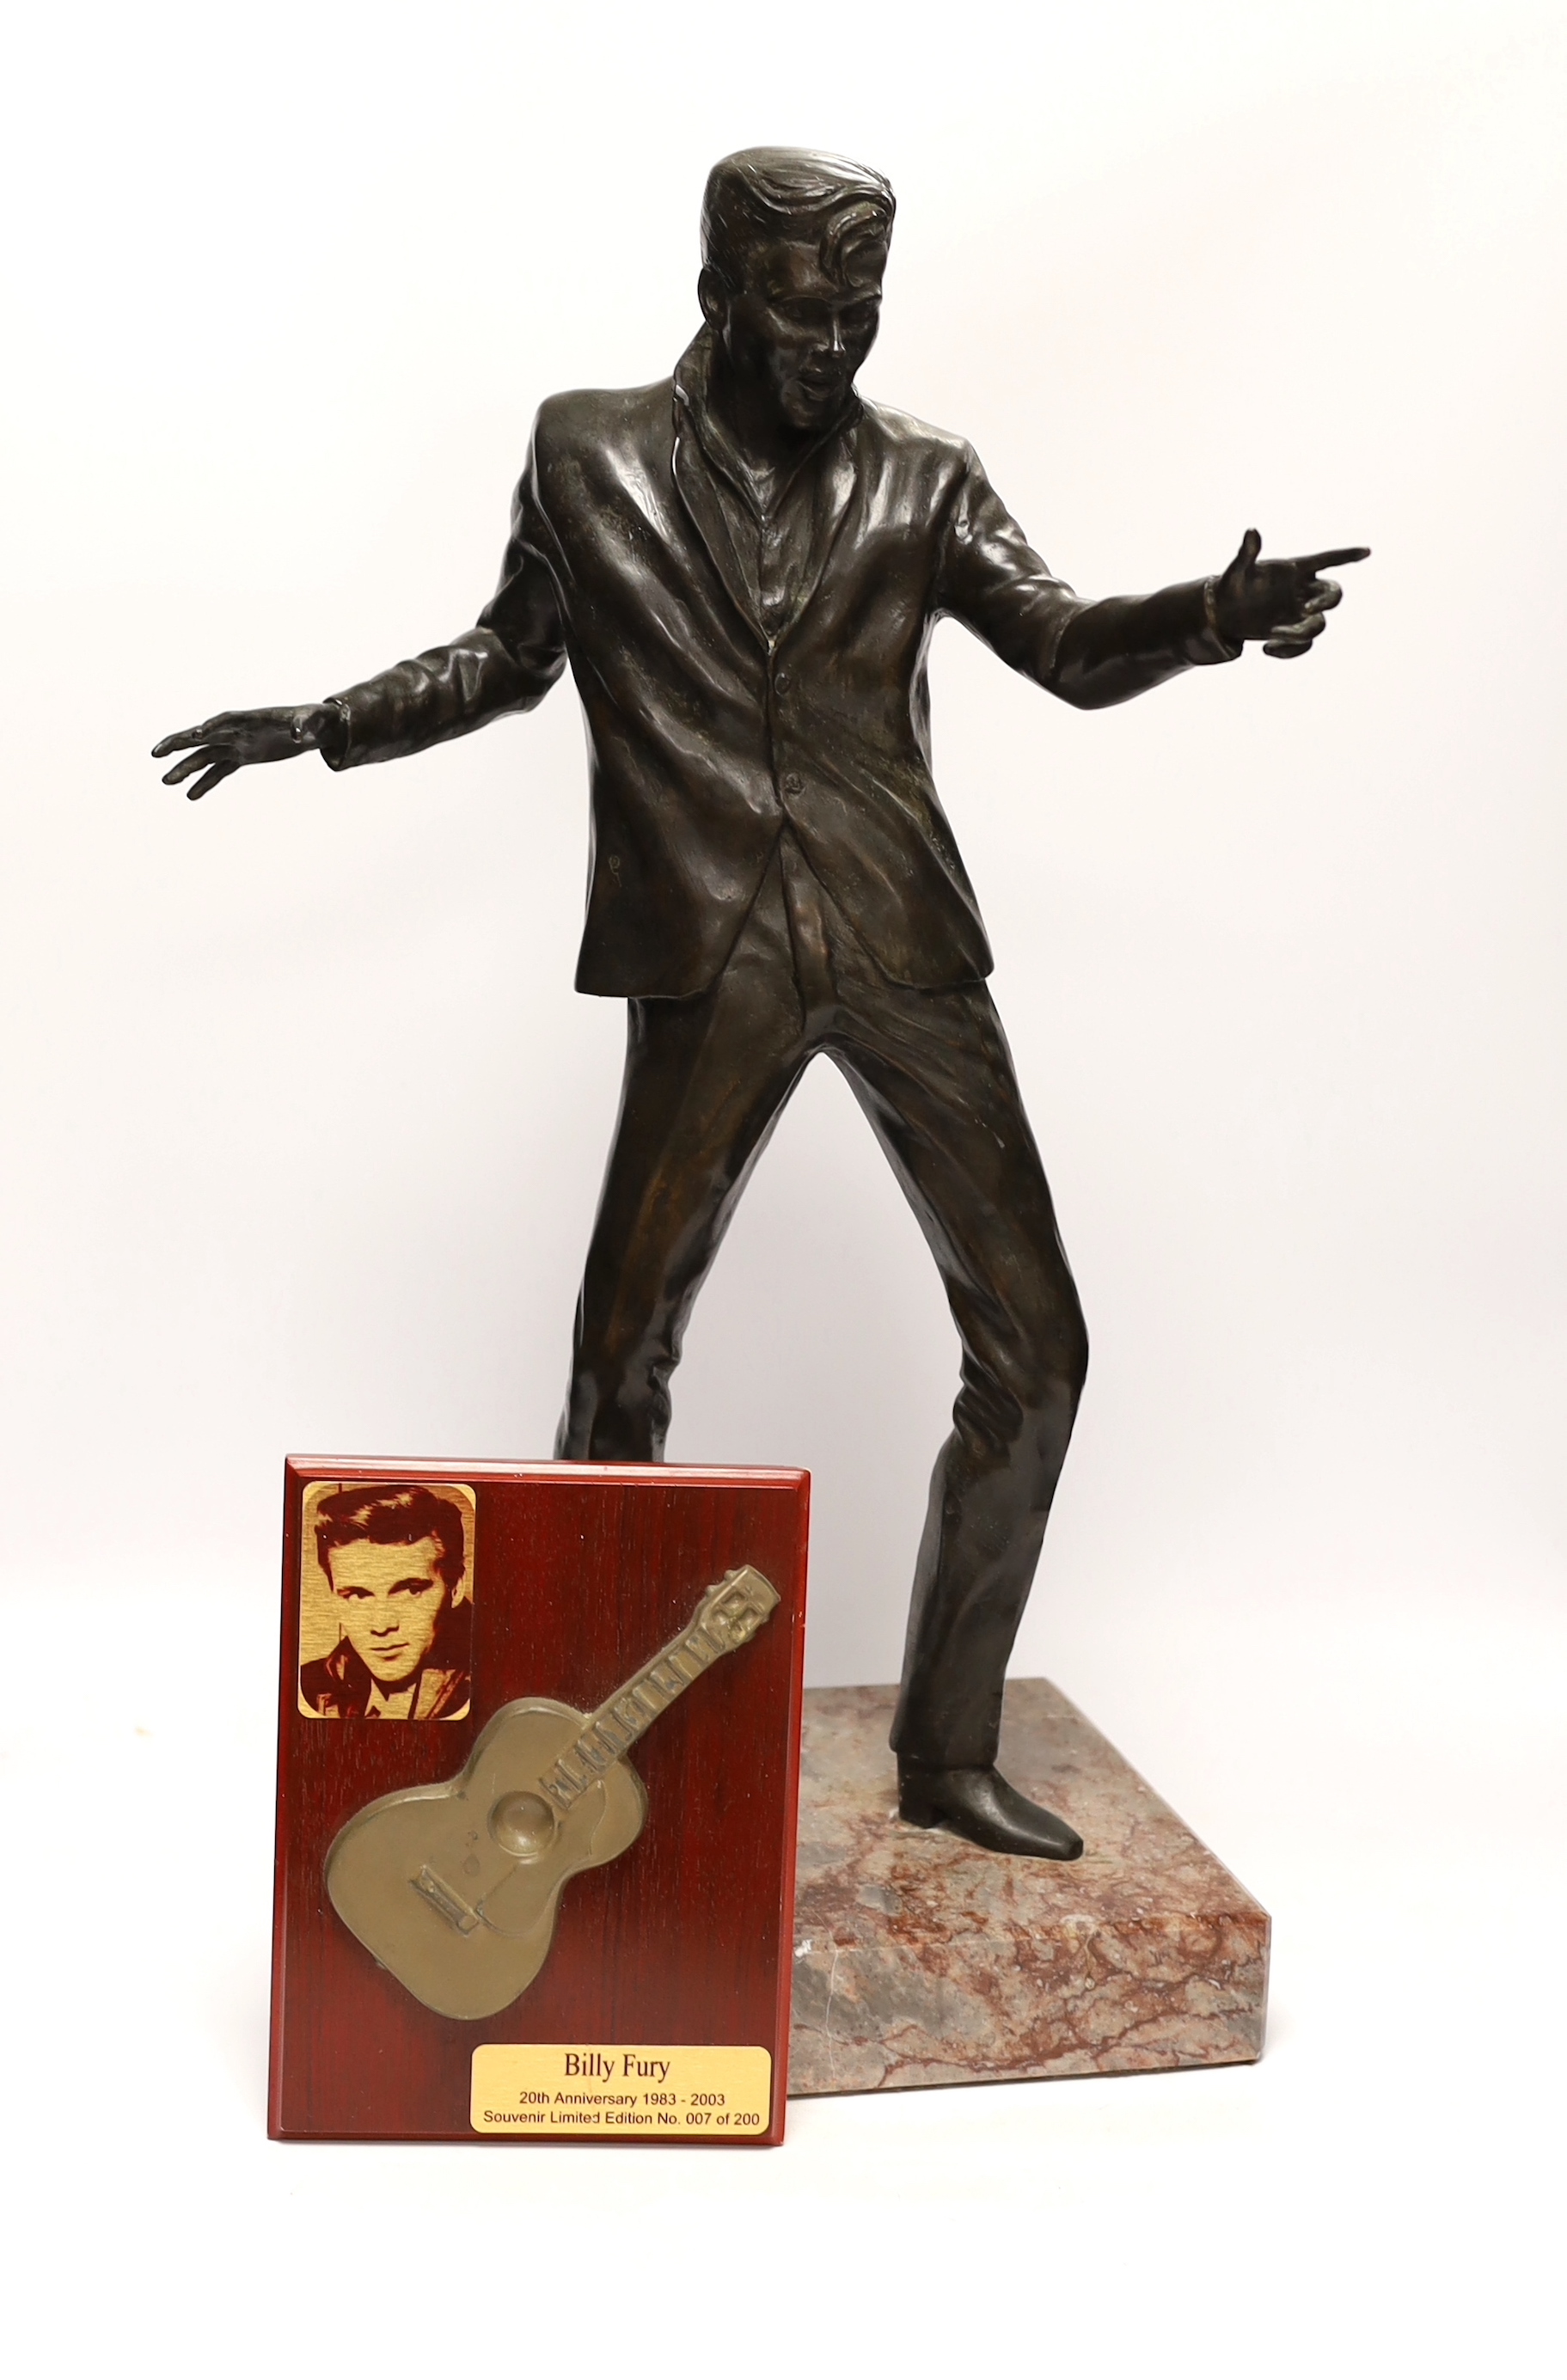 A bronze statue of Billy Fury, one of five cast by Tom Murphy, based on the public statue at the Albert Dock, Liverpool, together with a limited edition plaque, produced and sold to raise money to fund the installation o